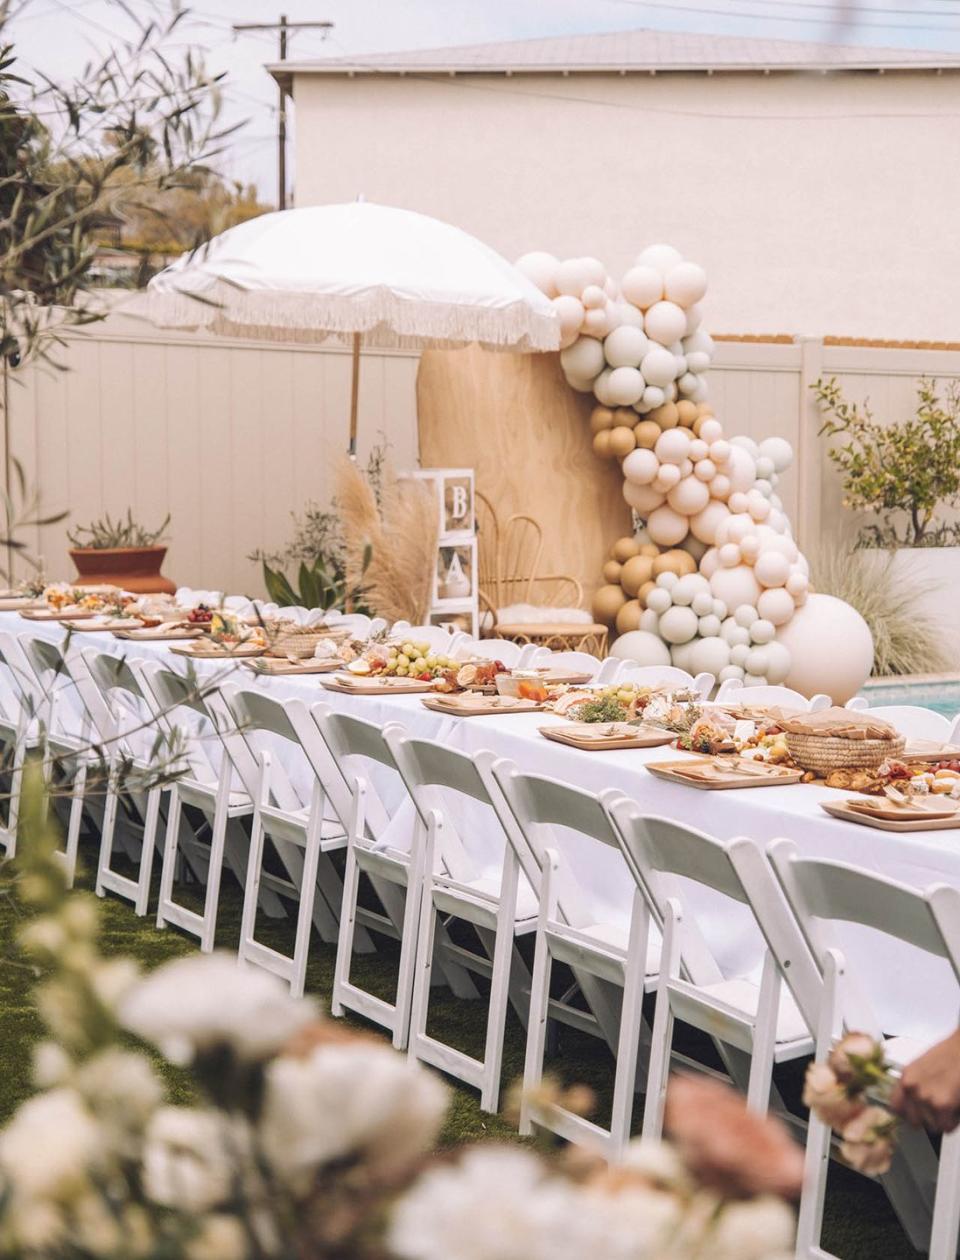 a netural baby shower uses a long picnic table, a great baby shower idea